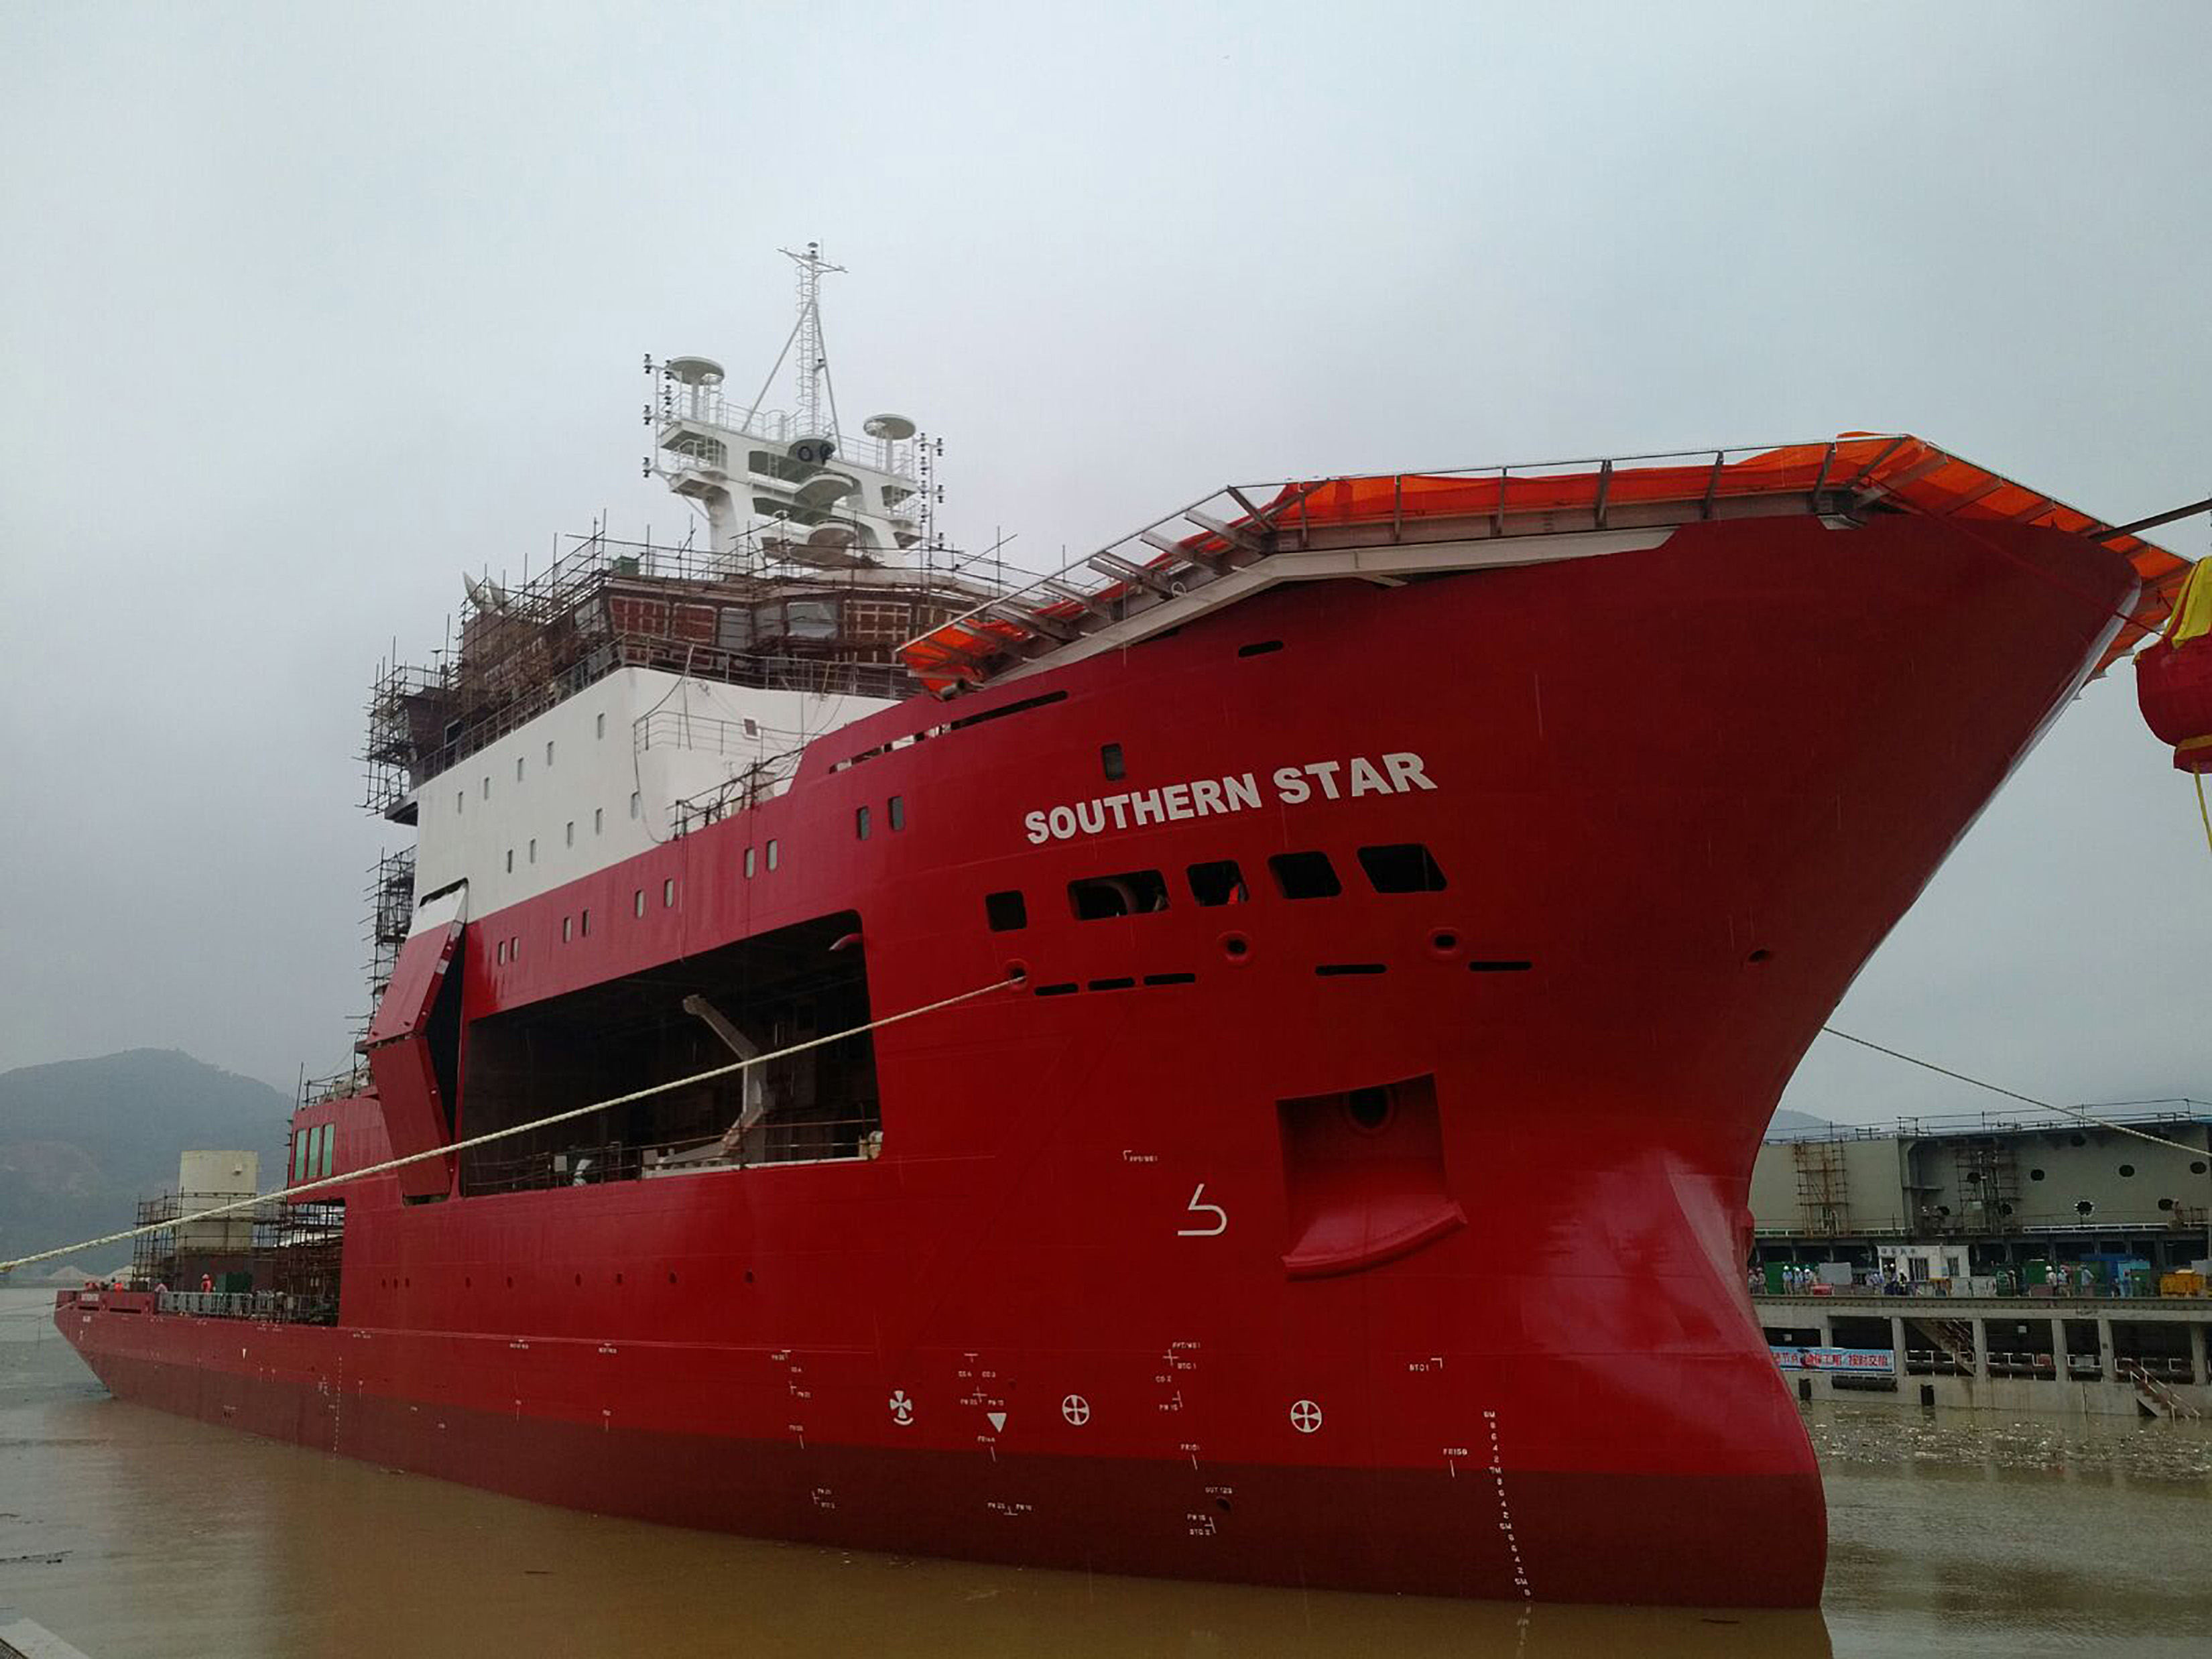 Advanced DSV “Southern Star” Launched